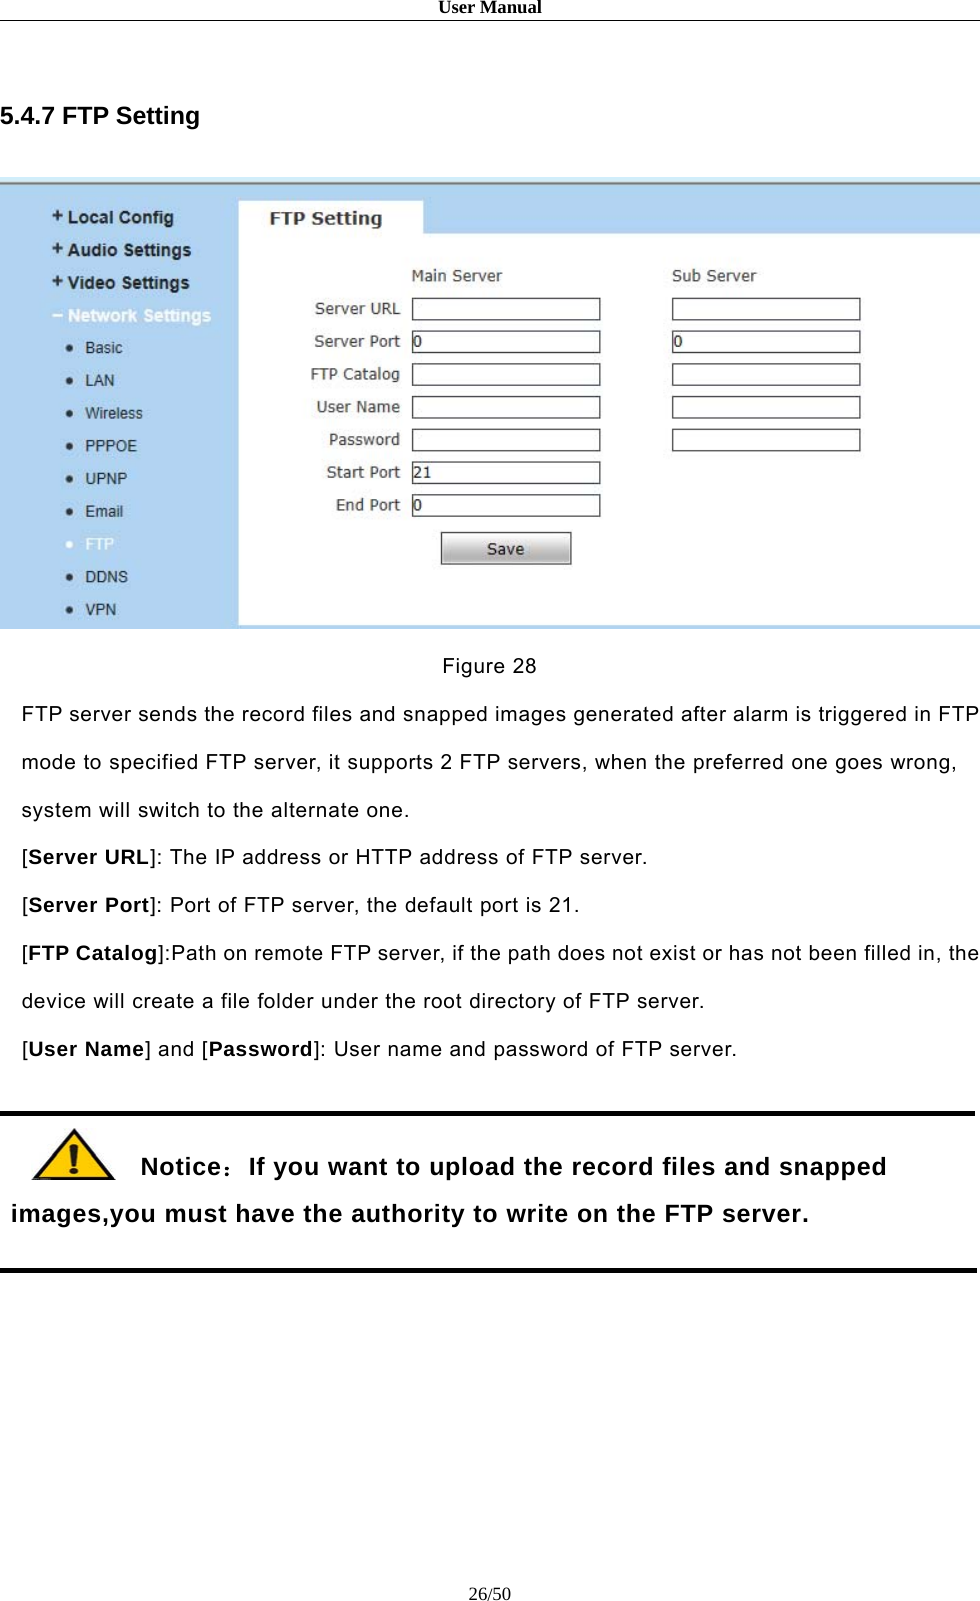 User Manual26/505.4.7 FTP SettingFigure 28FTP server sends the record files and snapped images generated after alarm is triggered in FTPmode to specified FTP server, it supports 2 FTP servers, when the preferred one goes wrong,system will switch to the alternate one.[Server URL]: The IP address or HTTP address of FTP server.[Server Port]: Port of FTP server, the default port is 21.[FTP Catalog]:Path on remote FTP server, if the path does not exist or has not been filled in, thedevice will create a file folder under the root directory of FTP server.[User Name] and [Password]: User name and password of FTP server.Notice：If you want to upload the record files and snappedimages,you must have the authority to write on the FTP server.